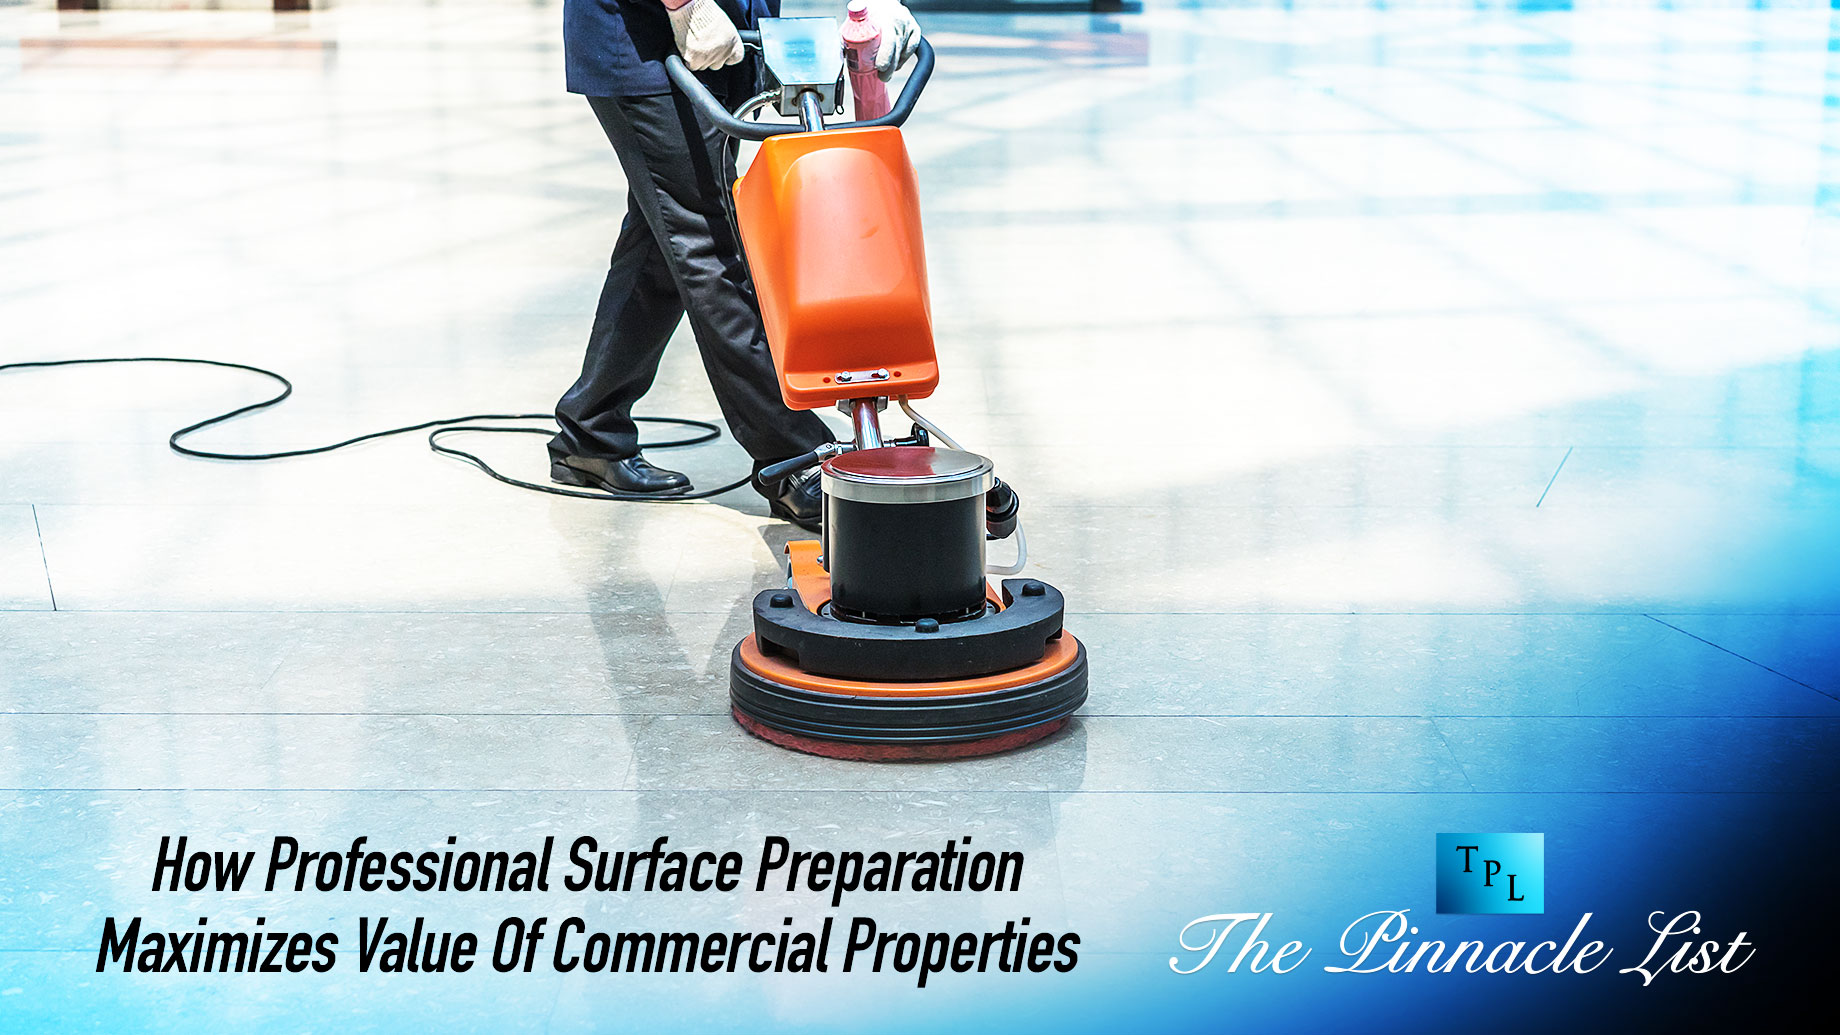 How Professional Surface Preparation Maximizes The Value Of Commercial Properties